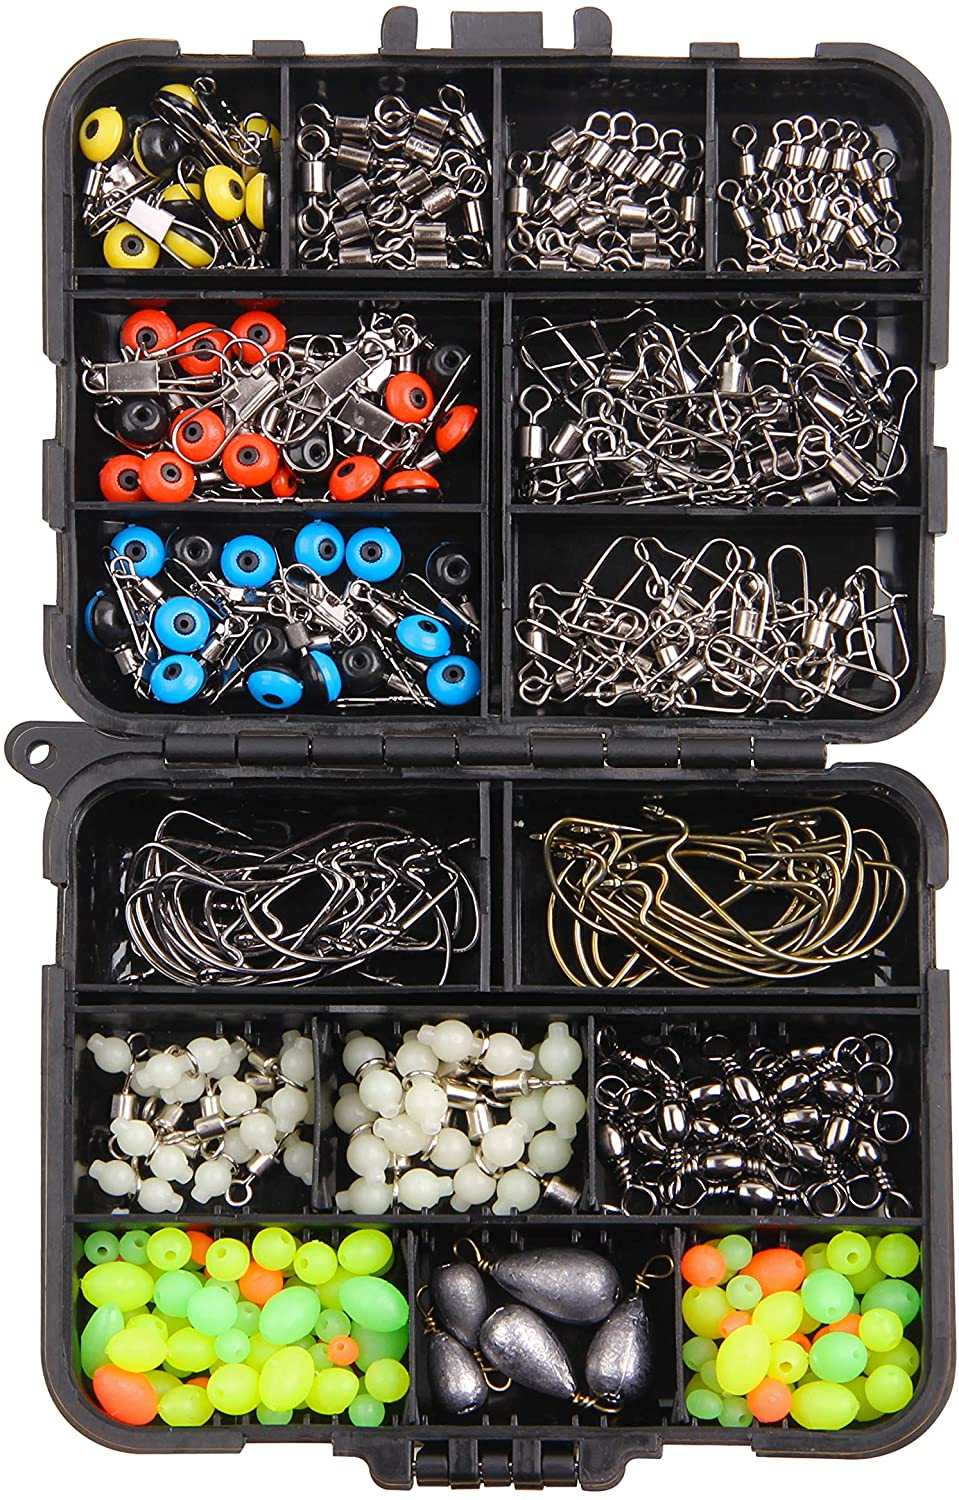 Swivels Fishing Tackle Kit, Fishing Tackle Box with Tackle Included Barrel Swivel Snaps, Sinker Slides, Jig Hooks, Fishing Beads Fishing Accessories Terminal Tackles for Freshwater Saltwater